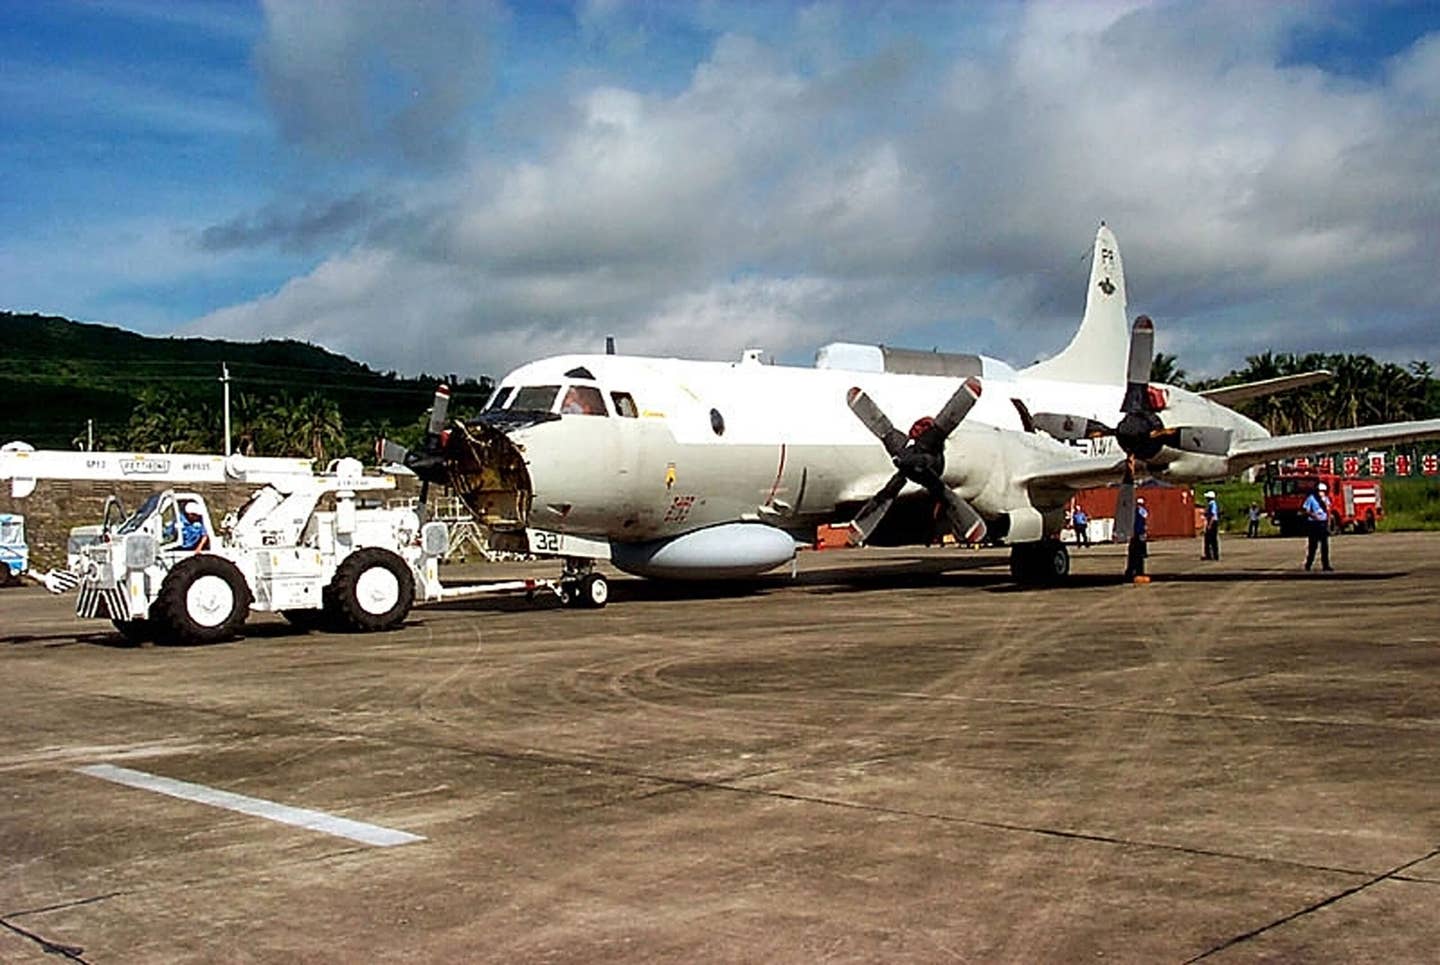 A Lockheed Martin recovery team member repositions the EP-3E Aries II aircraft at Lingshui Airfield, in Hainan, China, on June 18, 2001. The Fleet Reconnaissance Squadron One (VQ-1) aircraft was involved in a mid-air collision with a Chinese J-8 fighter on April 1, 2001 and made an emergency landing on Hainan Island, where it remained until disassembly and removal operations began. The aircraft was disassembled and returned to the United States. <em>Photo Courtesy of Lockheed Martin Aeronautics Co./U.S. Navy via Getty Images</em>